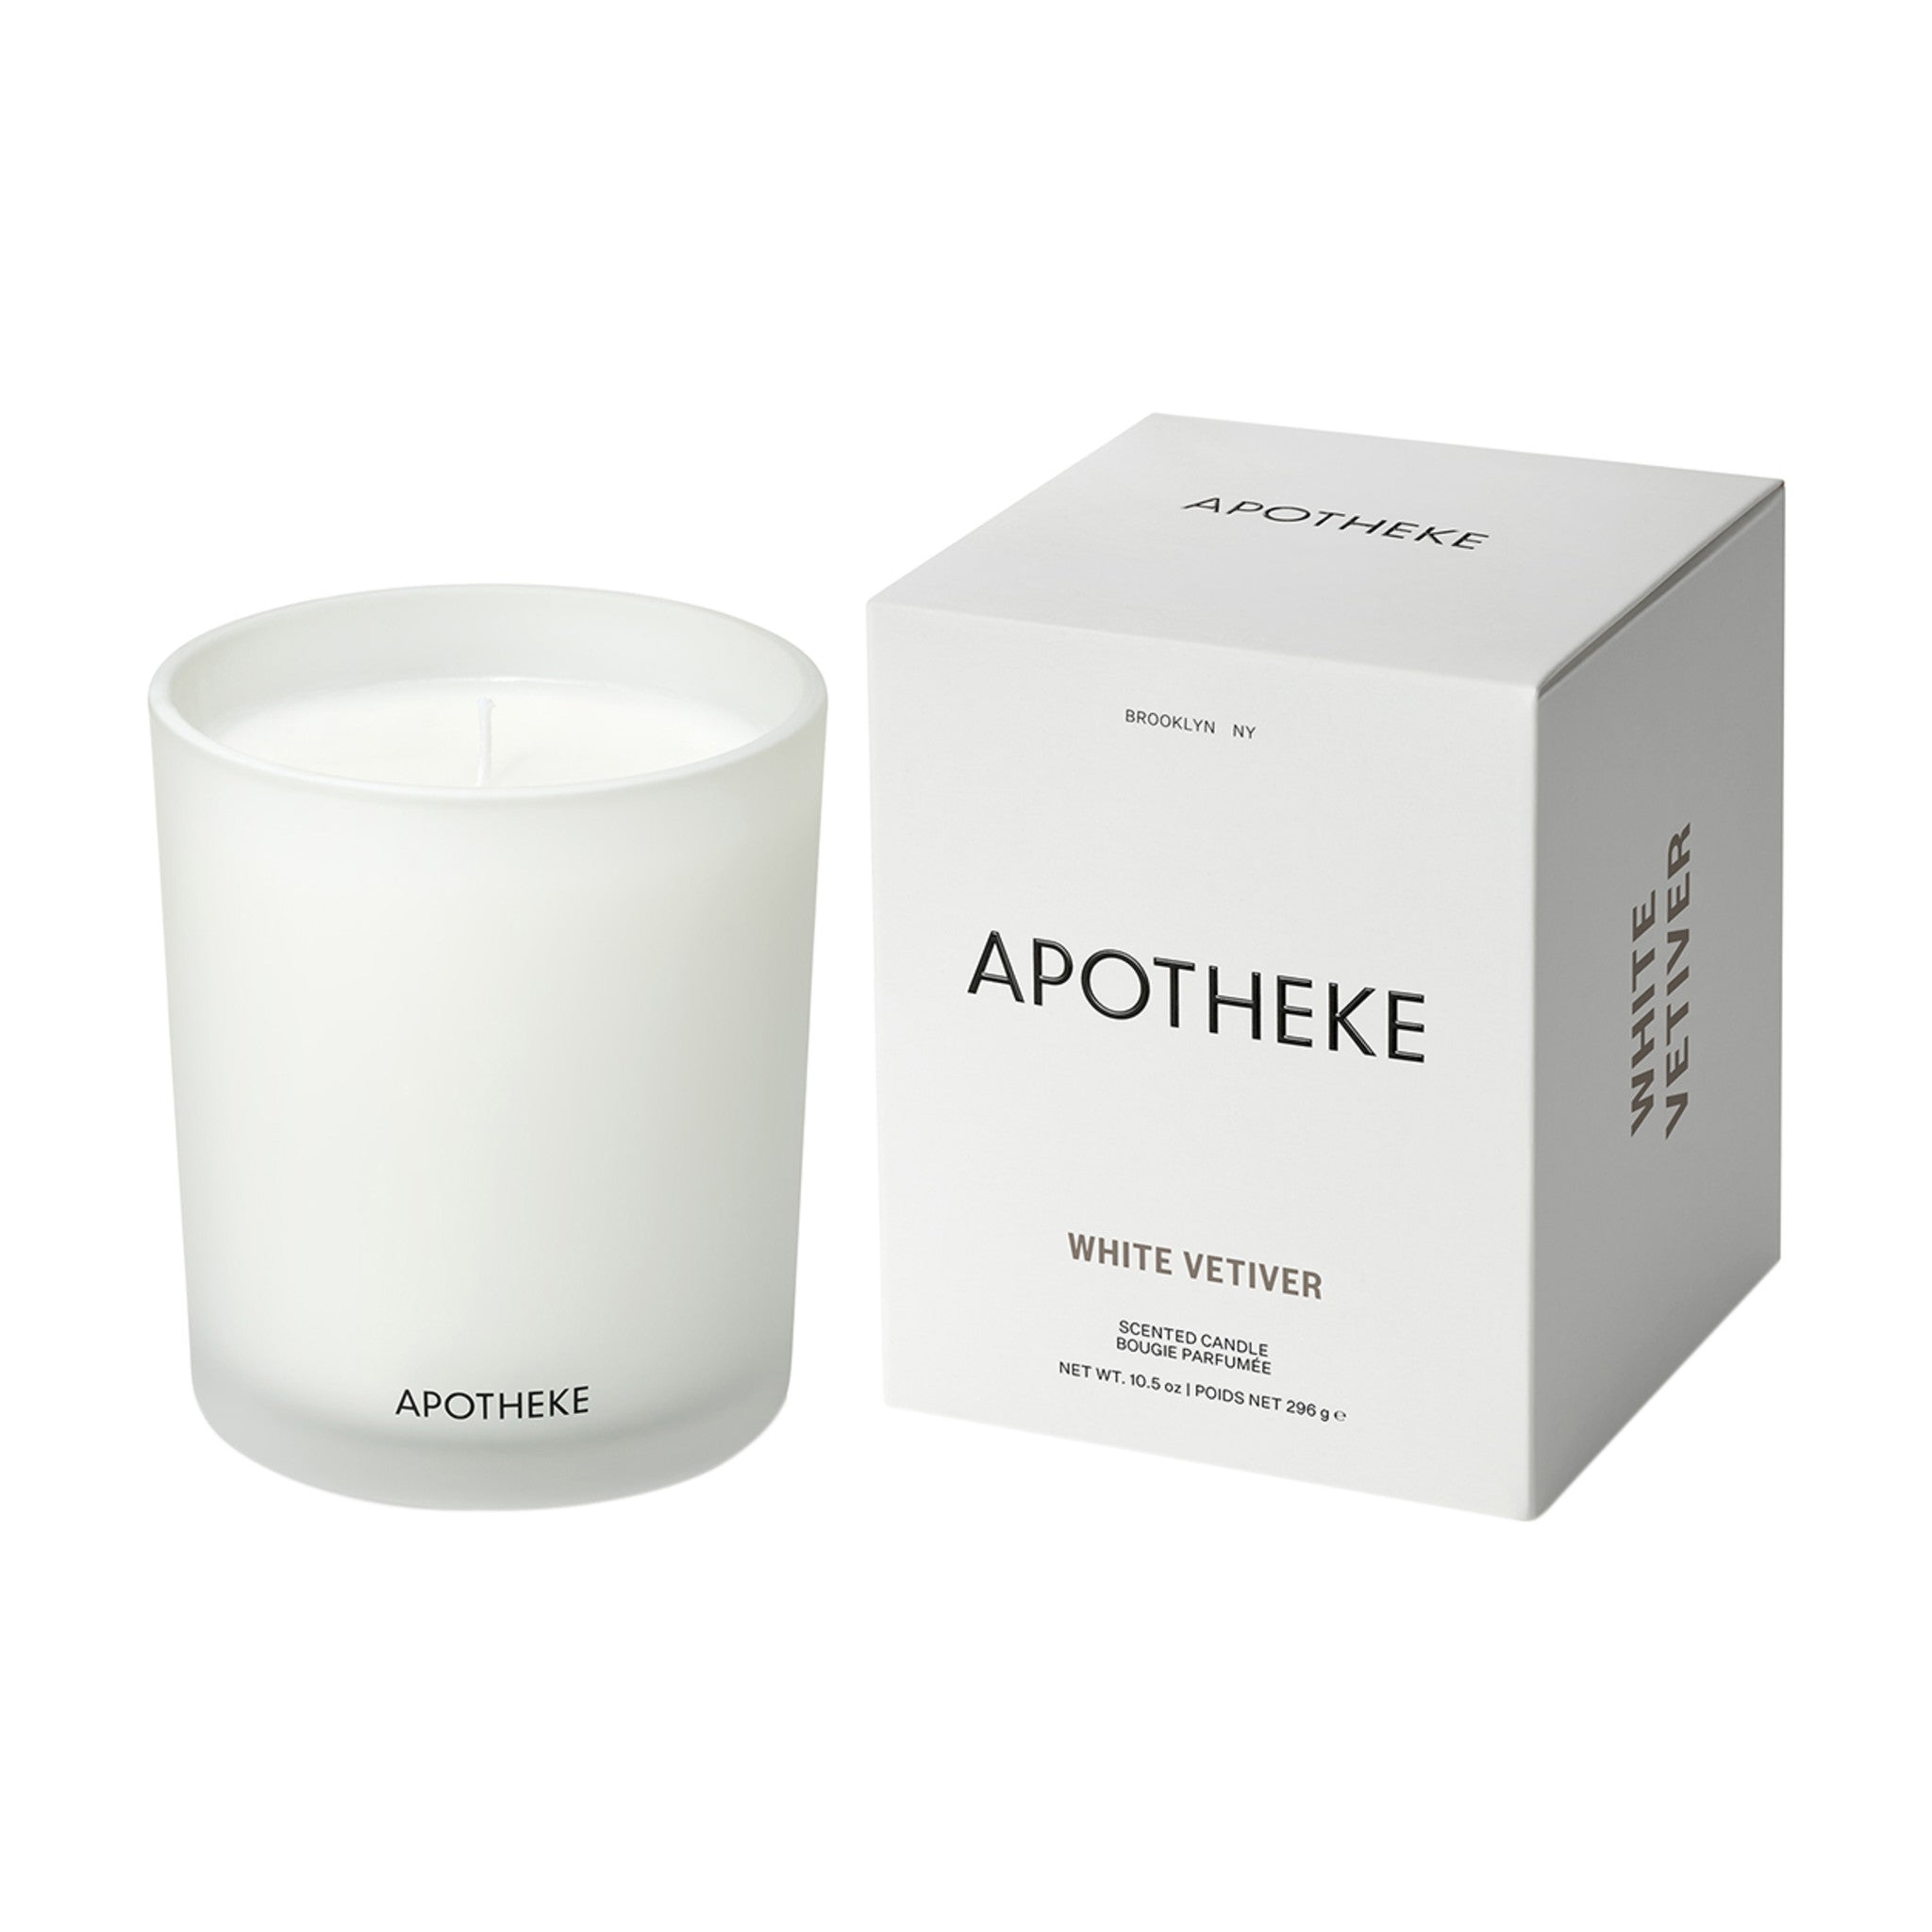 Apotheke White Vetiver Classic Scented Candle main image.